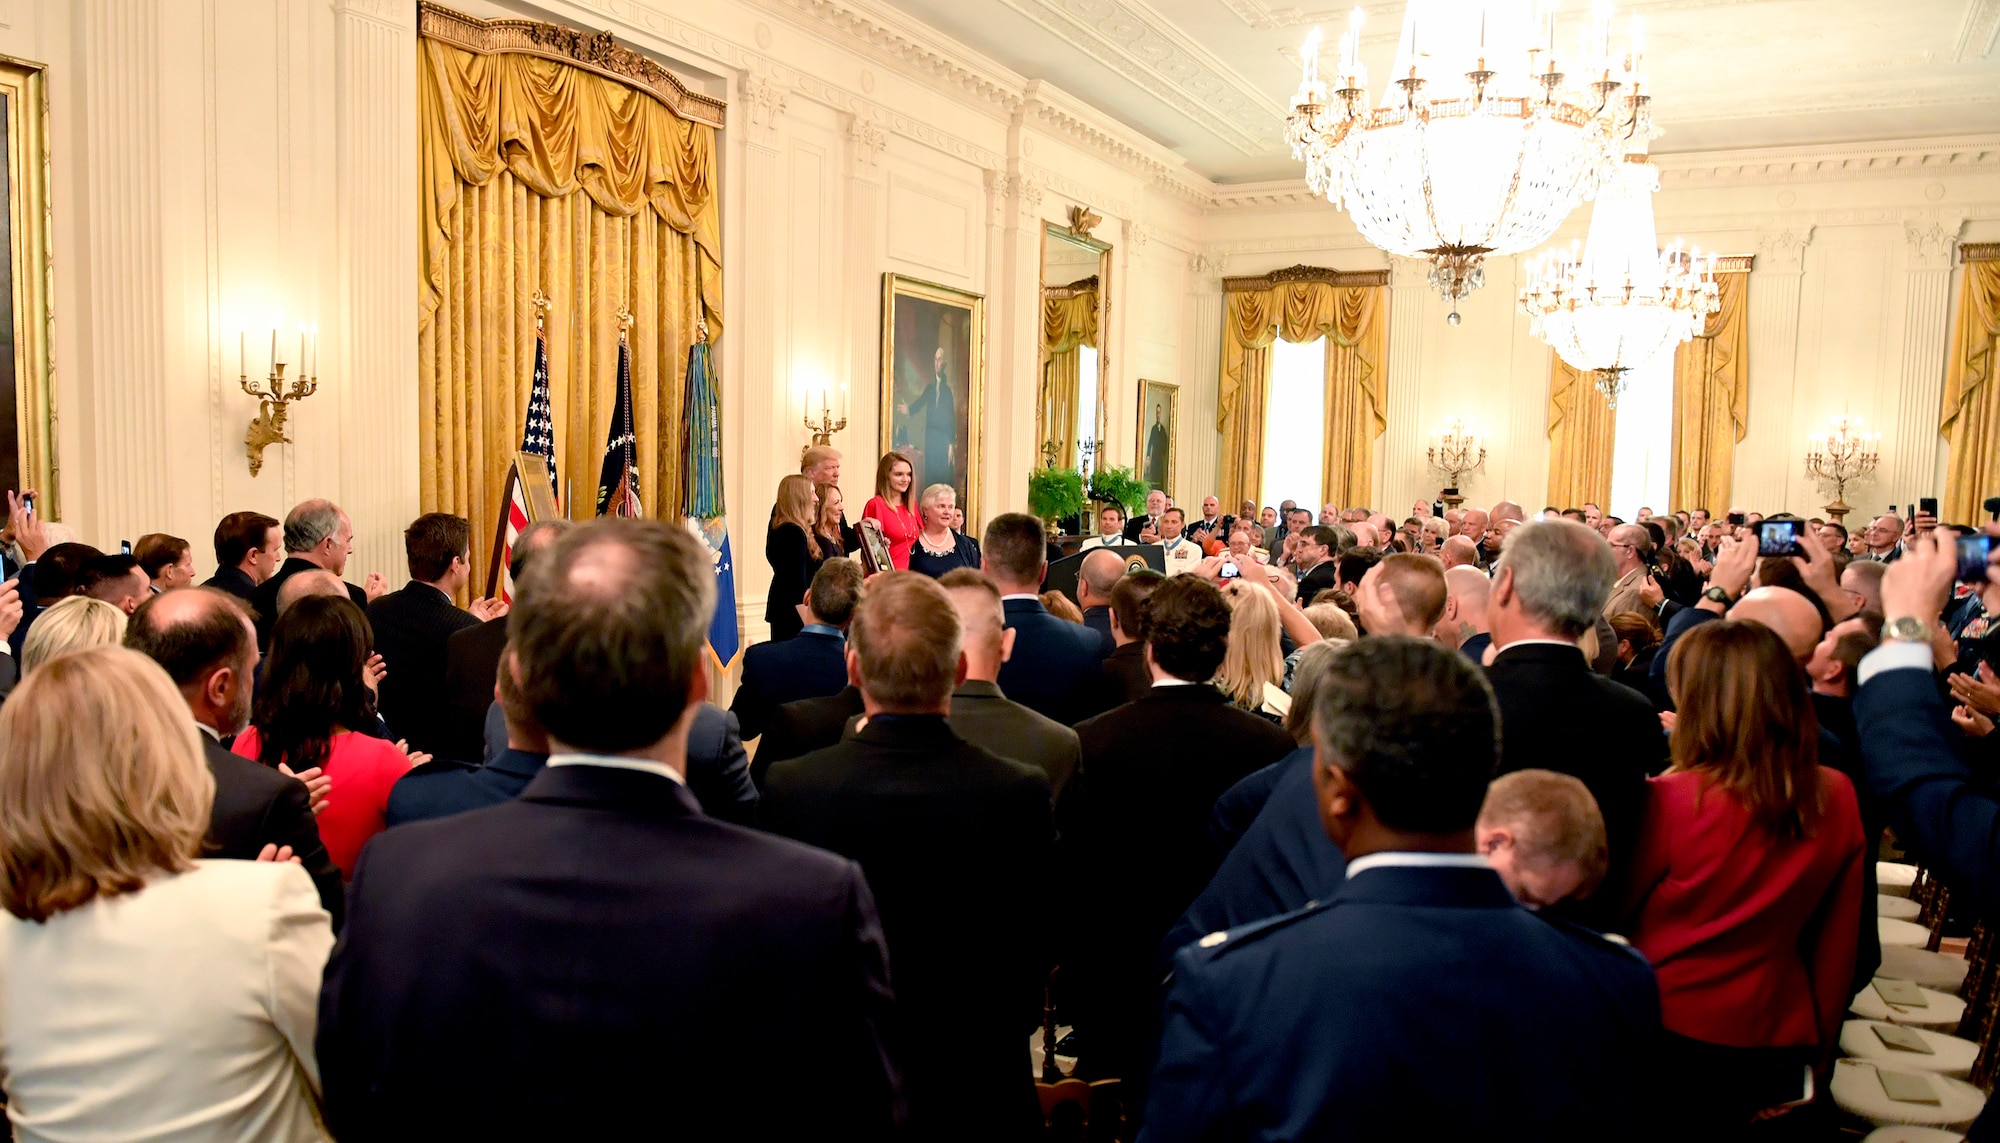 Attendees observe as President Donald J. Trump presents the Medal of Honor to Valerie Nessel, the spouse of U.S. Air Force Tech. Sgt. John Chapman, during a ceremony at the White House in Washington, D.C., June 26, 2018. Chapman was posthumously awarded the Medal of Honor for actions on Takur Ghar mountain in Afghanistan on March 4, 2002, when his elite special operations team was ambushed by the enemy and came under heavy fire from multiple directions. Chapman immediately charged an enemy bunker through thigh-deep snow and killed all enemy occupants. Courageously moving from cover to assault a second machine gun bunker, he was injured by enemy fire. Despite severe wounds, he fought relentlessly, sustaining a violent engagement with multiple enemy personnel before making the ultimate sacrifice. With his last actions, he saved the lives of his teammates. (U.S. Air Force photo by Wayne A. Clark)